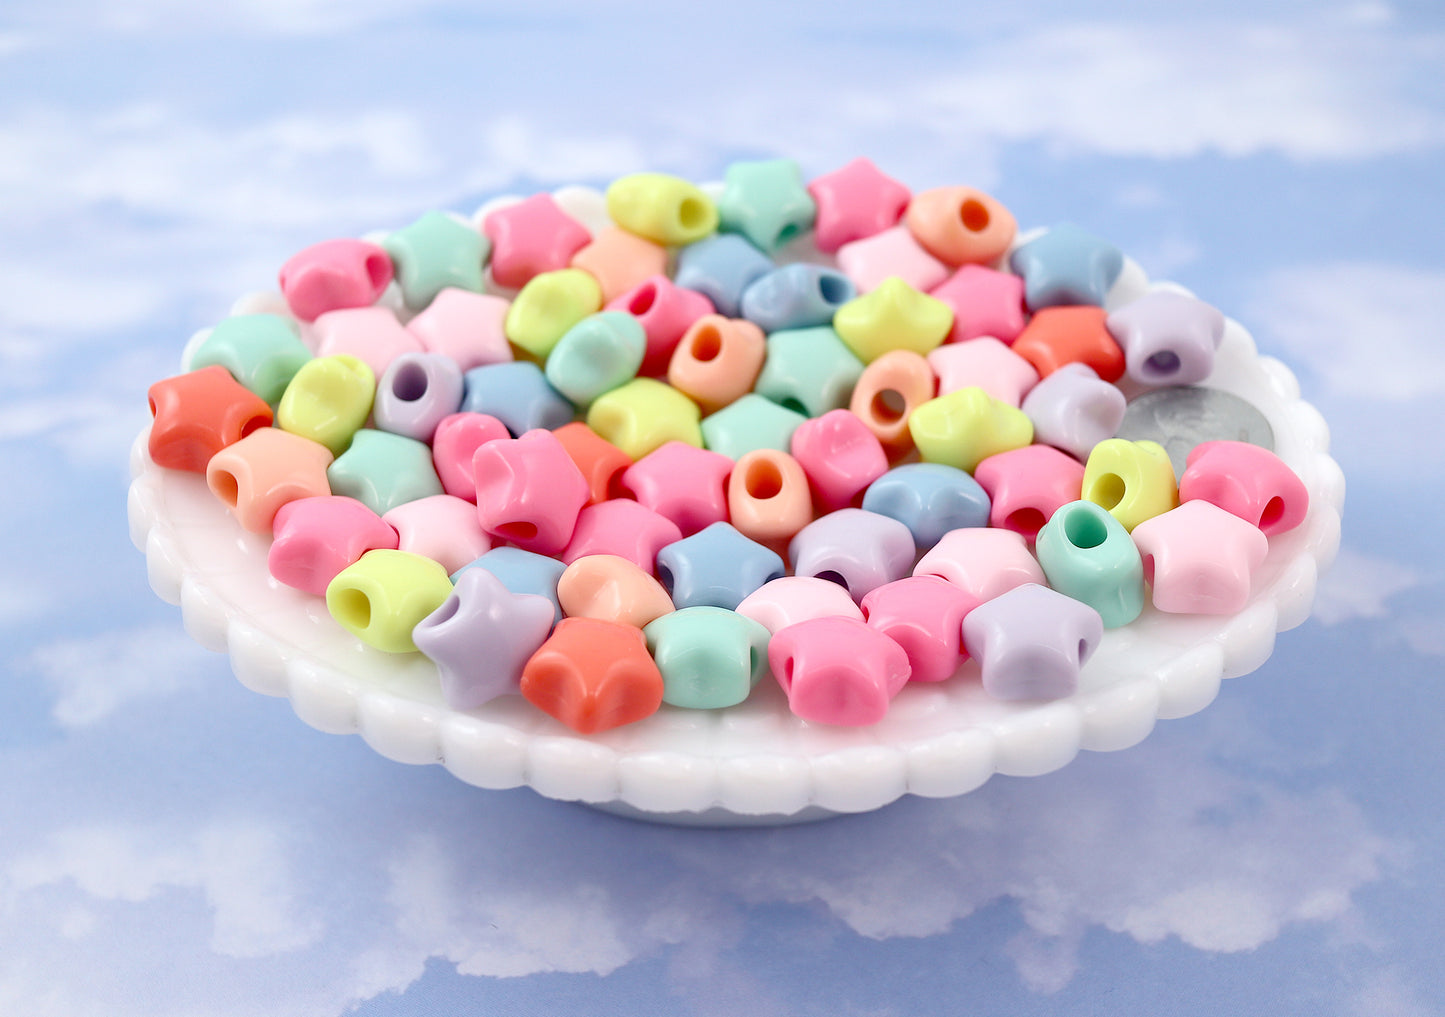 Pastel Star Beads - 14mm Chunky 3D Rounded Puffy Pastel Star Acrylic or Resin Beads - 50 pcs set